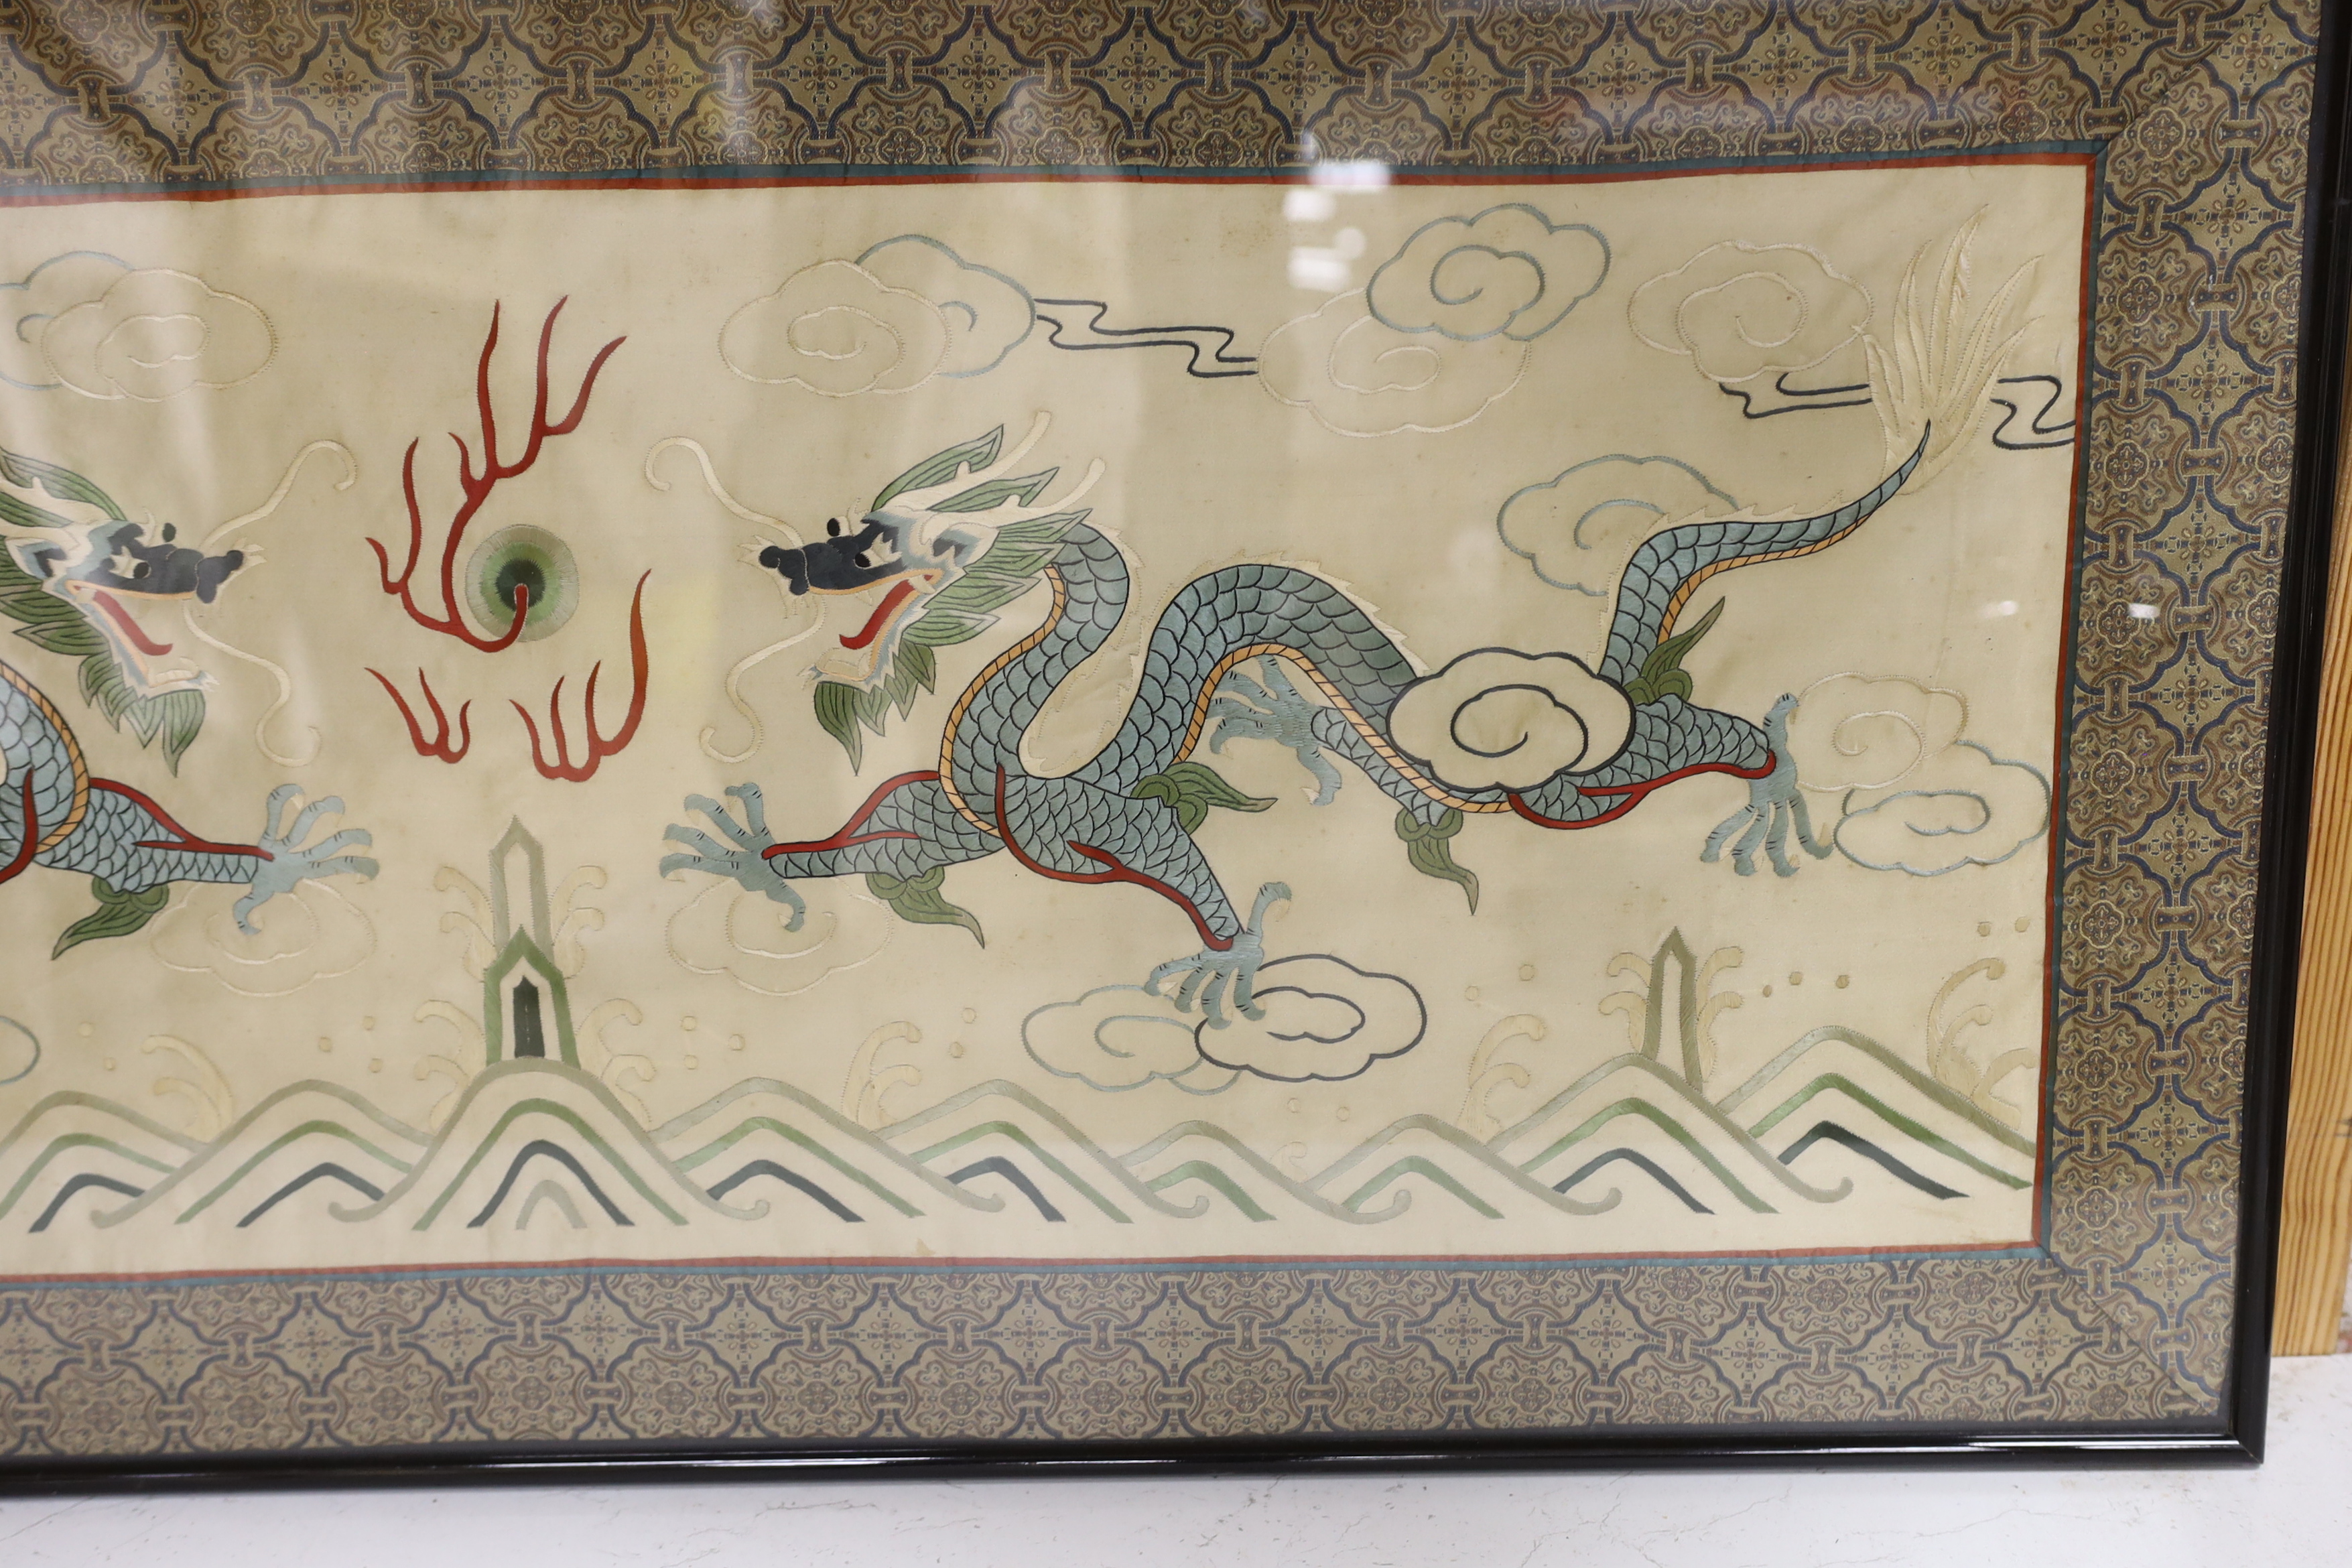 A framed 20th century Chinese silk embroidered 'dragon’ panel, with flaming pearl design, bordered with silk brocade